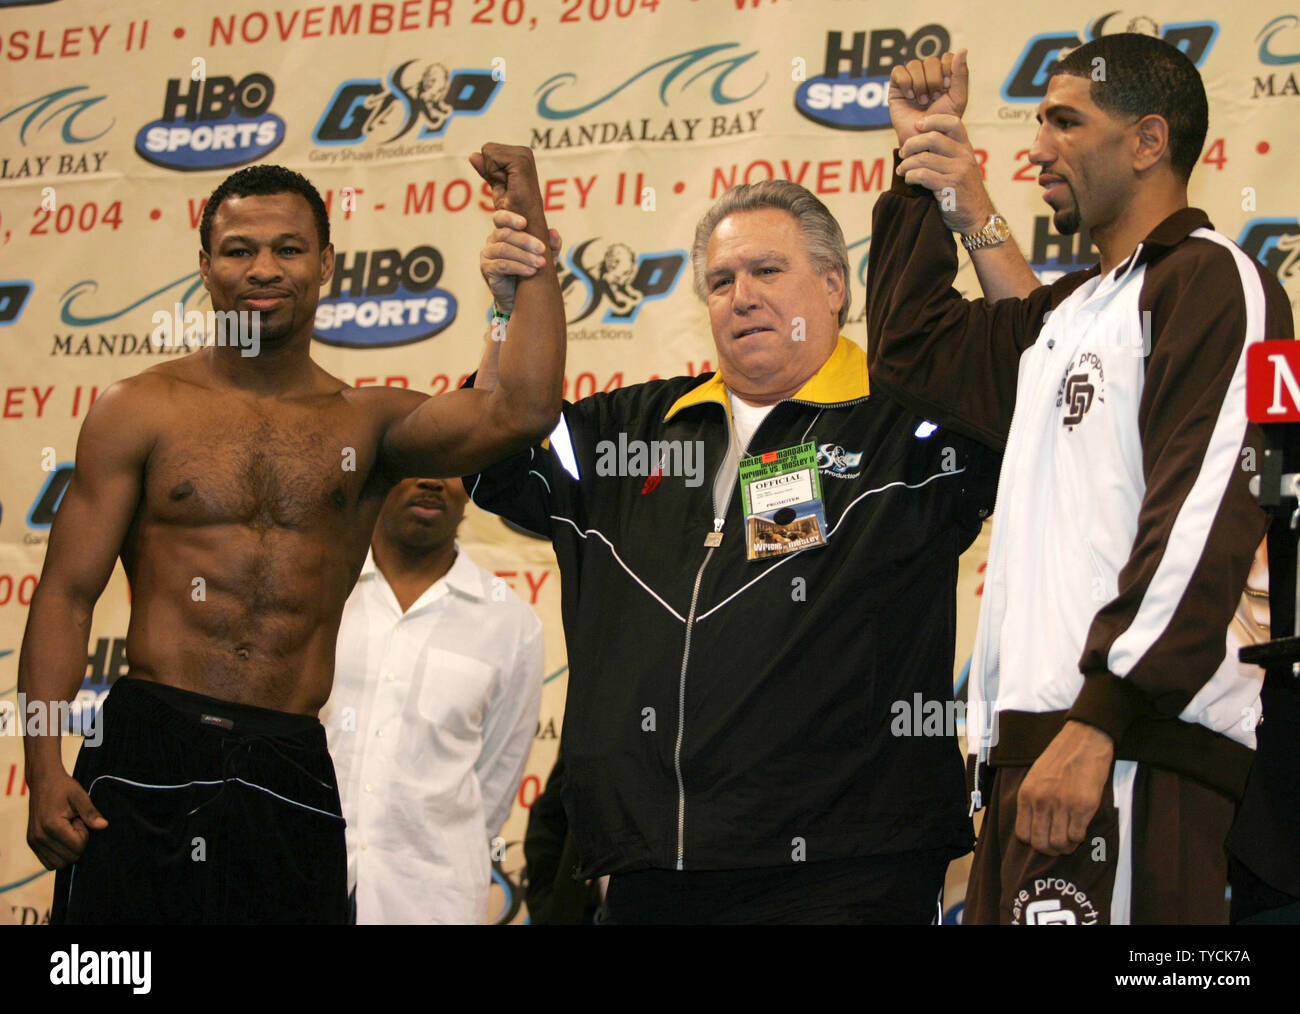 Sugar Shane Mosley (left) and Winky Wright, stand with promoter Gary Shaw at the weigh-in for their title fight at the Mandalay Bay in Las Vegas on November 19, 2004.   (UPI Photo/Roger Williams) Stock Photo